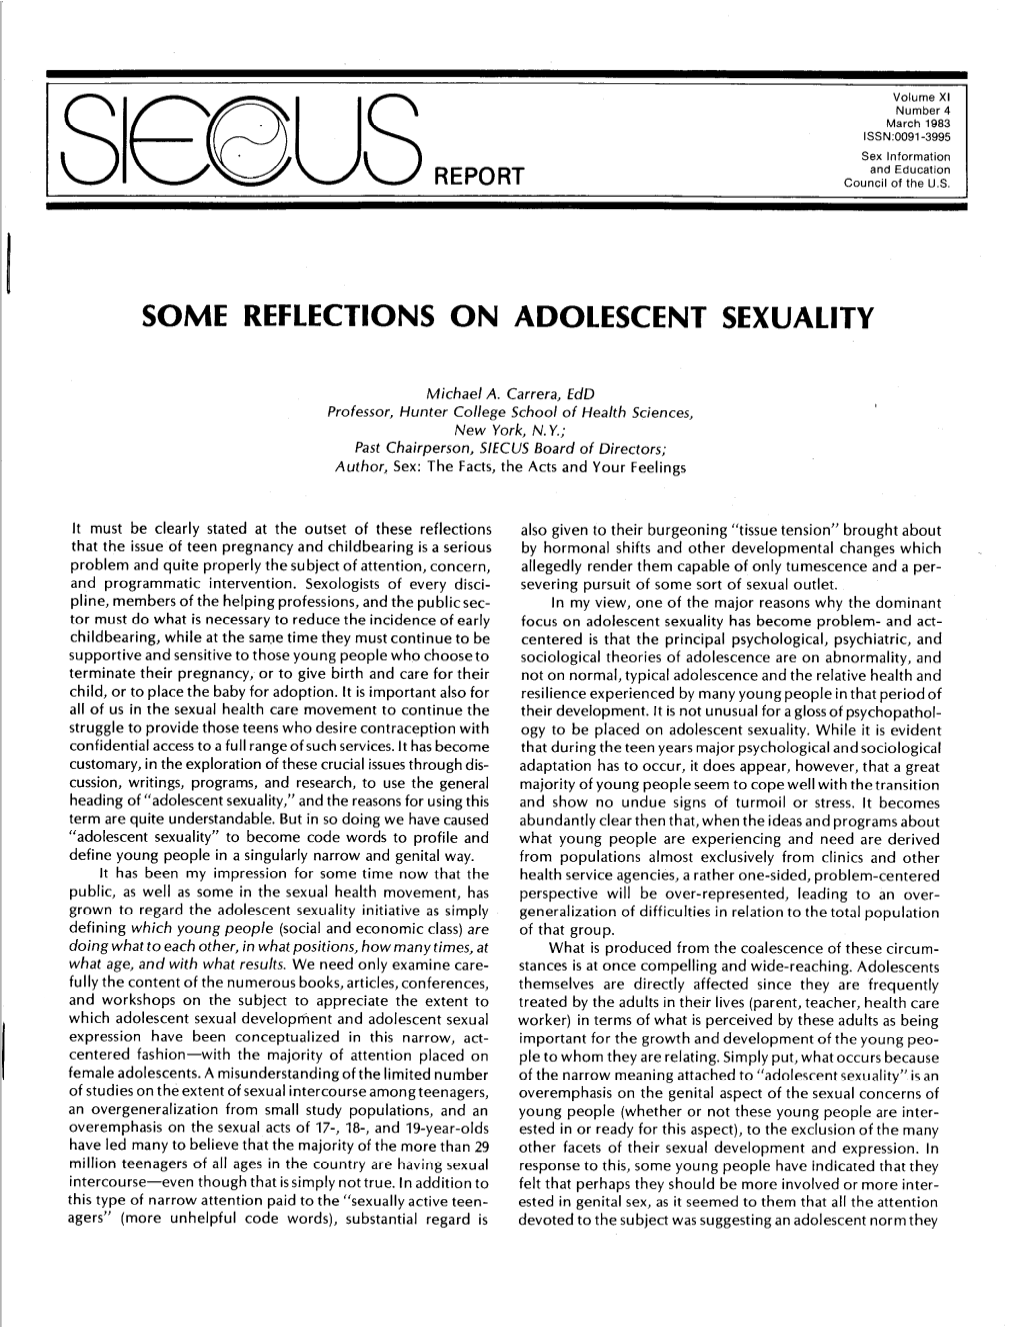 Some Reflections on Adolescent Sexuality